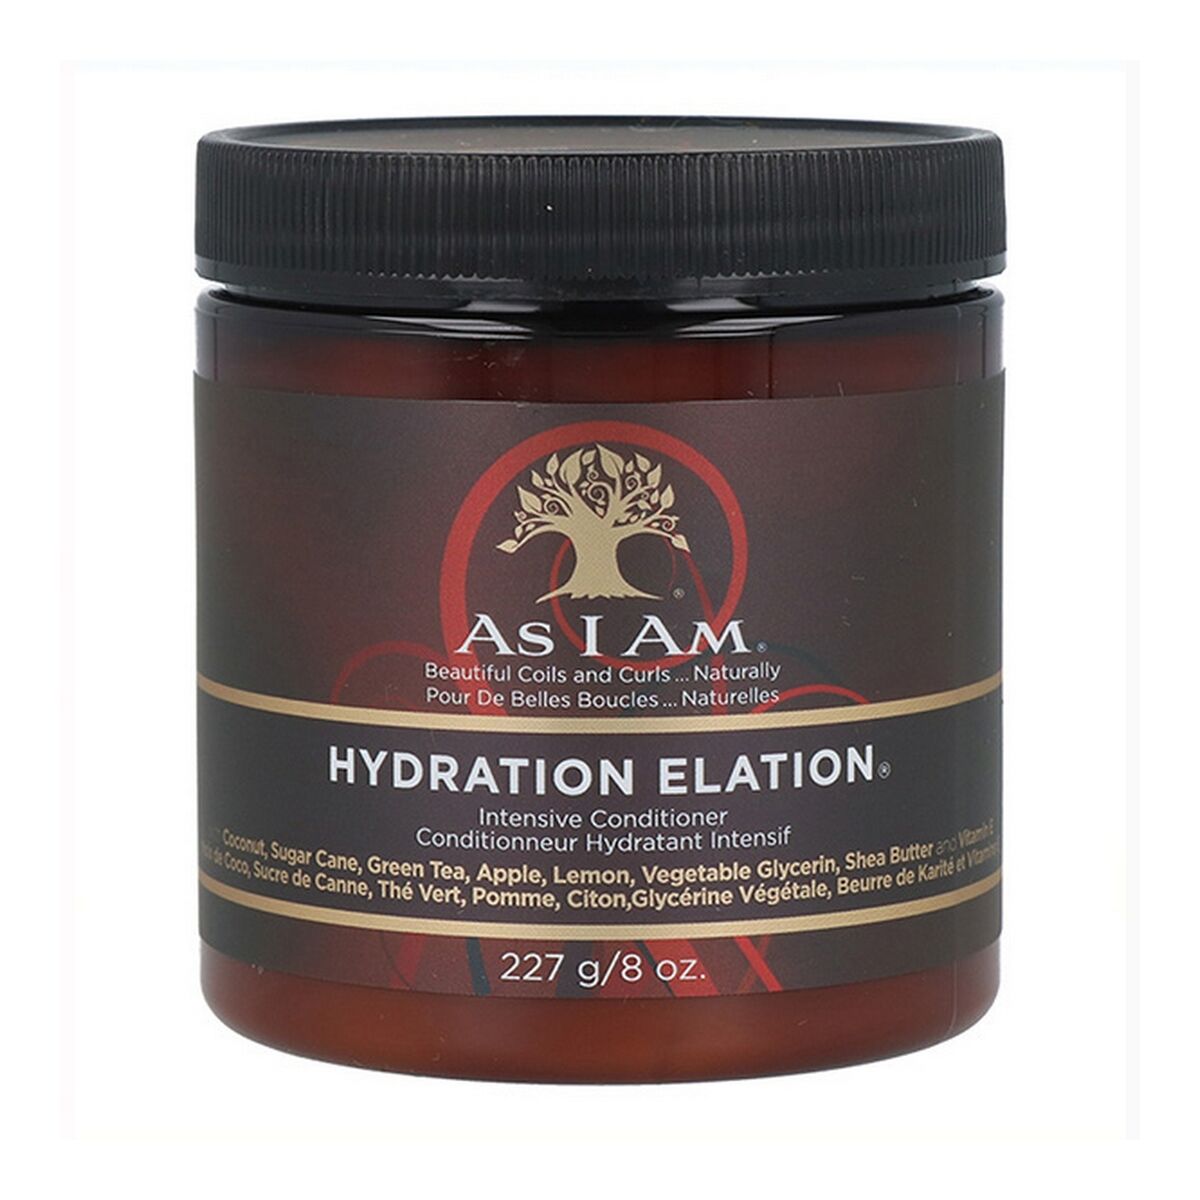 Balsam As I Am Hydration Elation Intensive Conditioner (237 ml) (227 g)